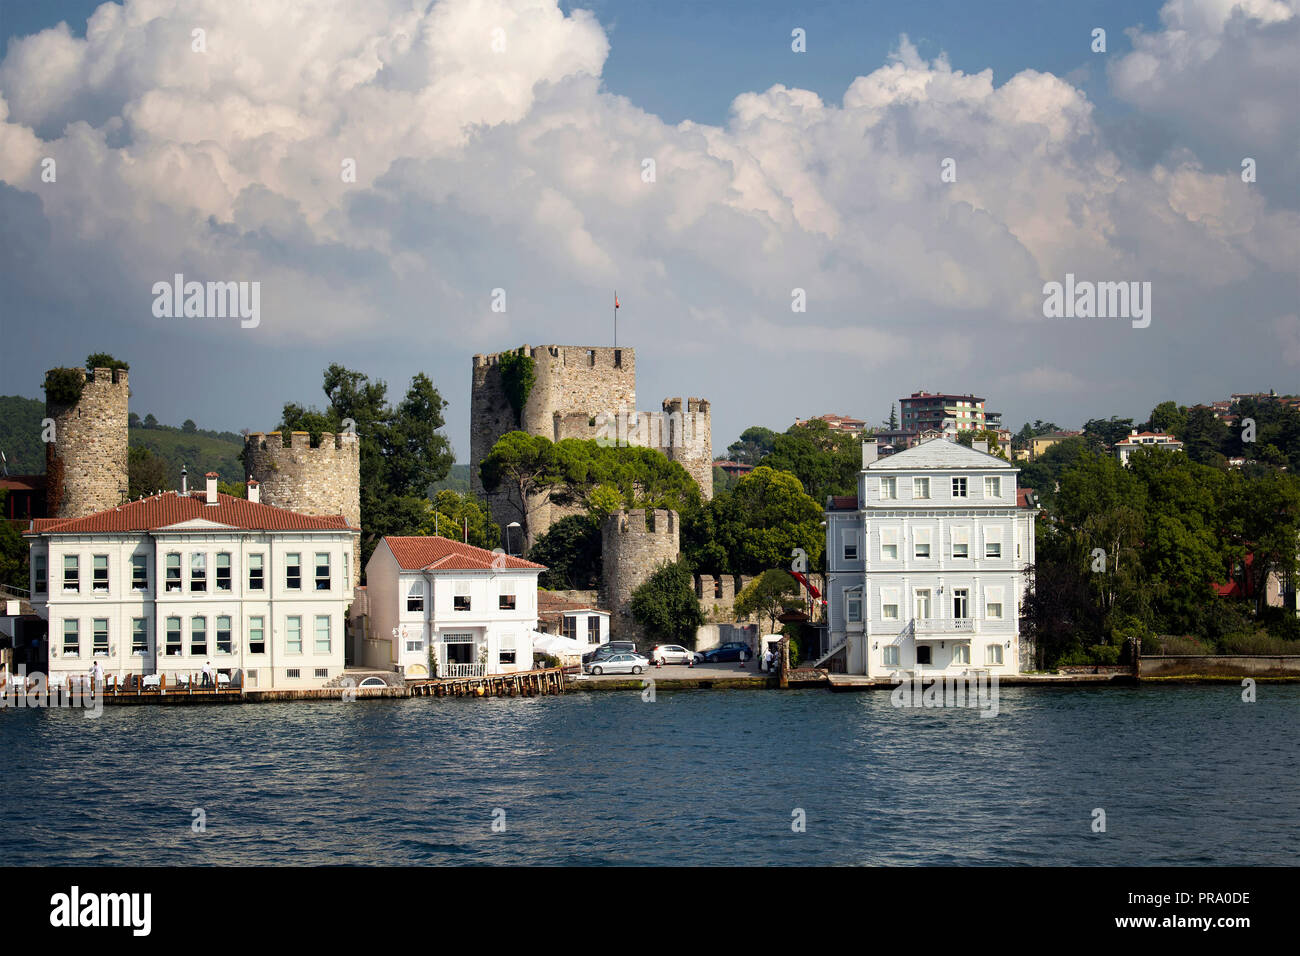 View of historical, old Turkish / Ottoman houses and a castle by Bosphorus on Asian side of Istanbul. It is a sunny / cloudy summer day. Stock Photo